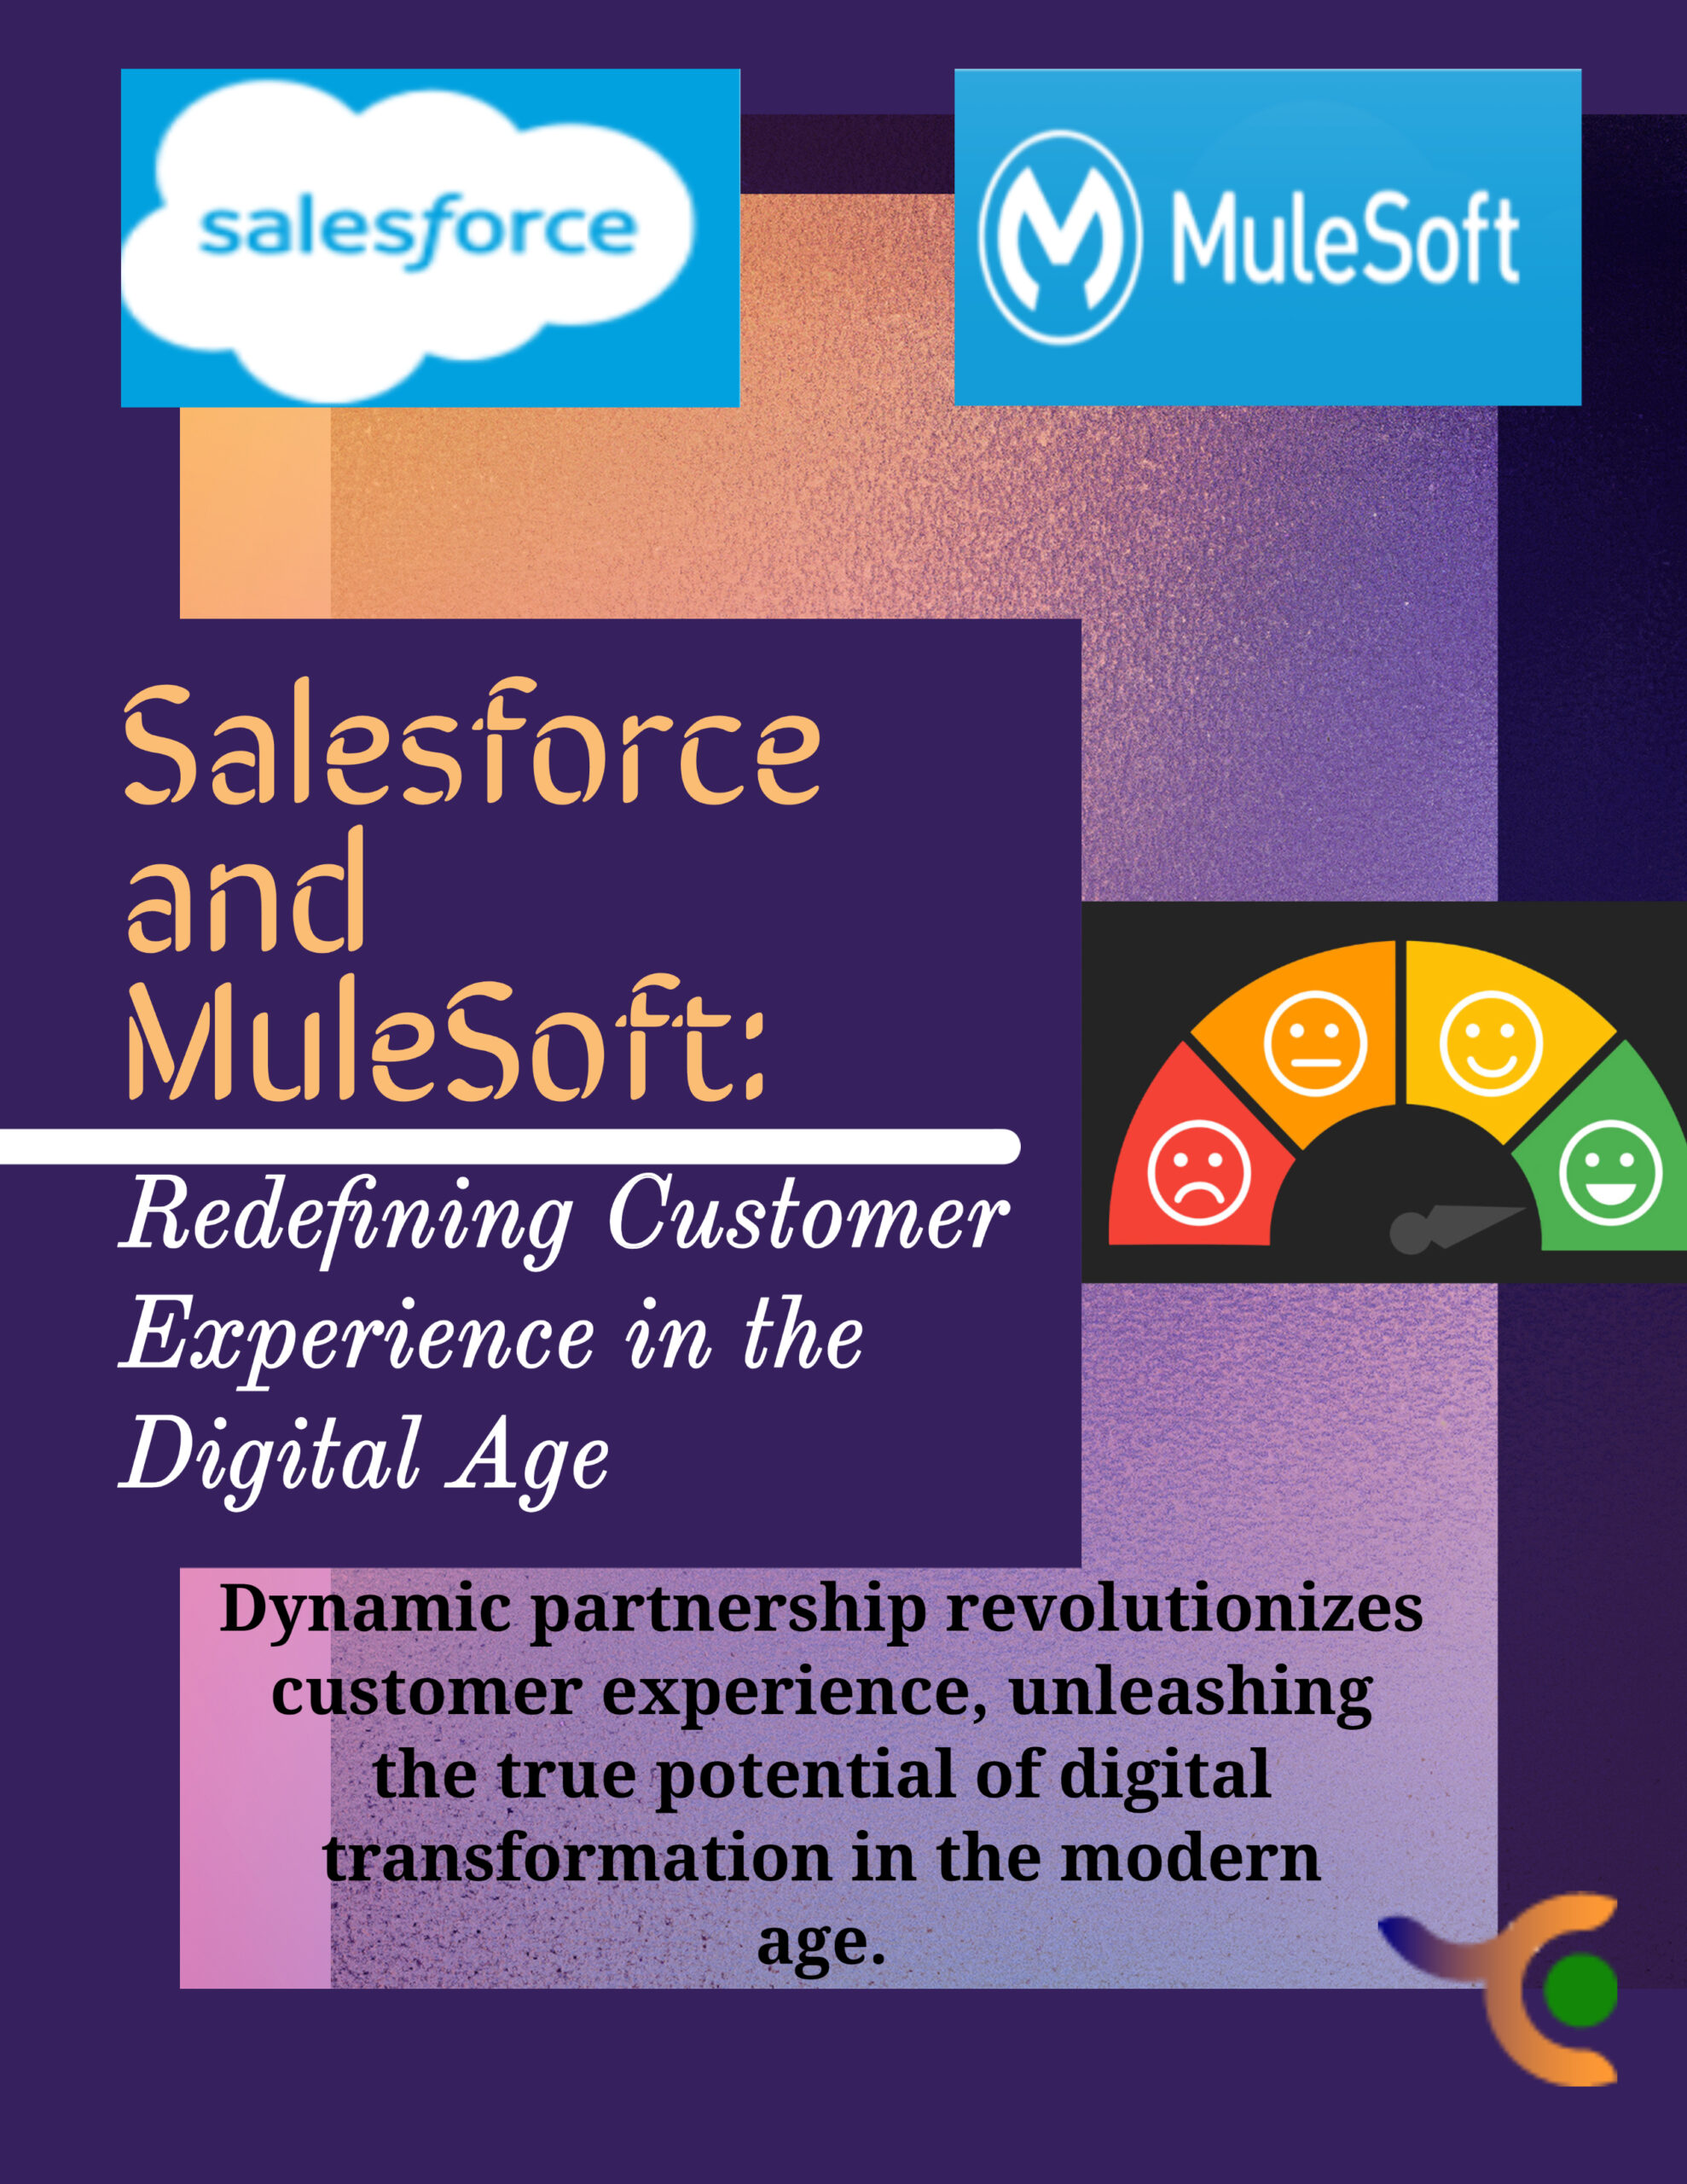 Salesforce and MuleSoft: Redefining Customer Experience in the Digital Age